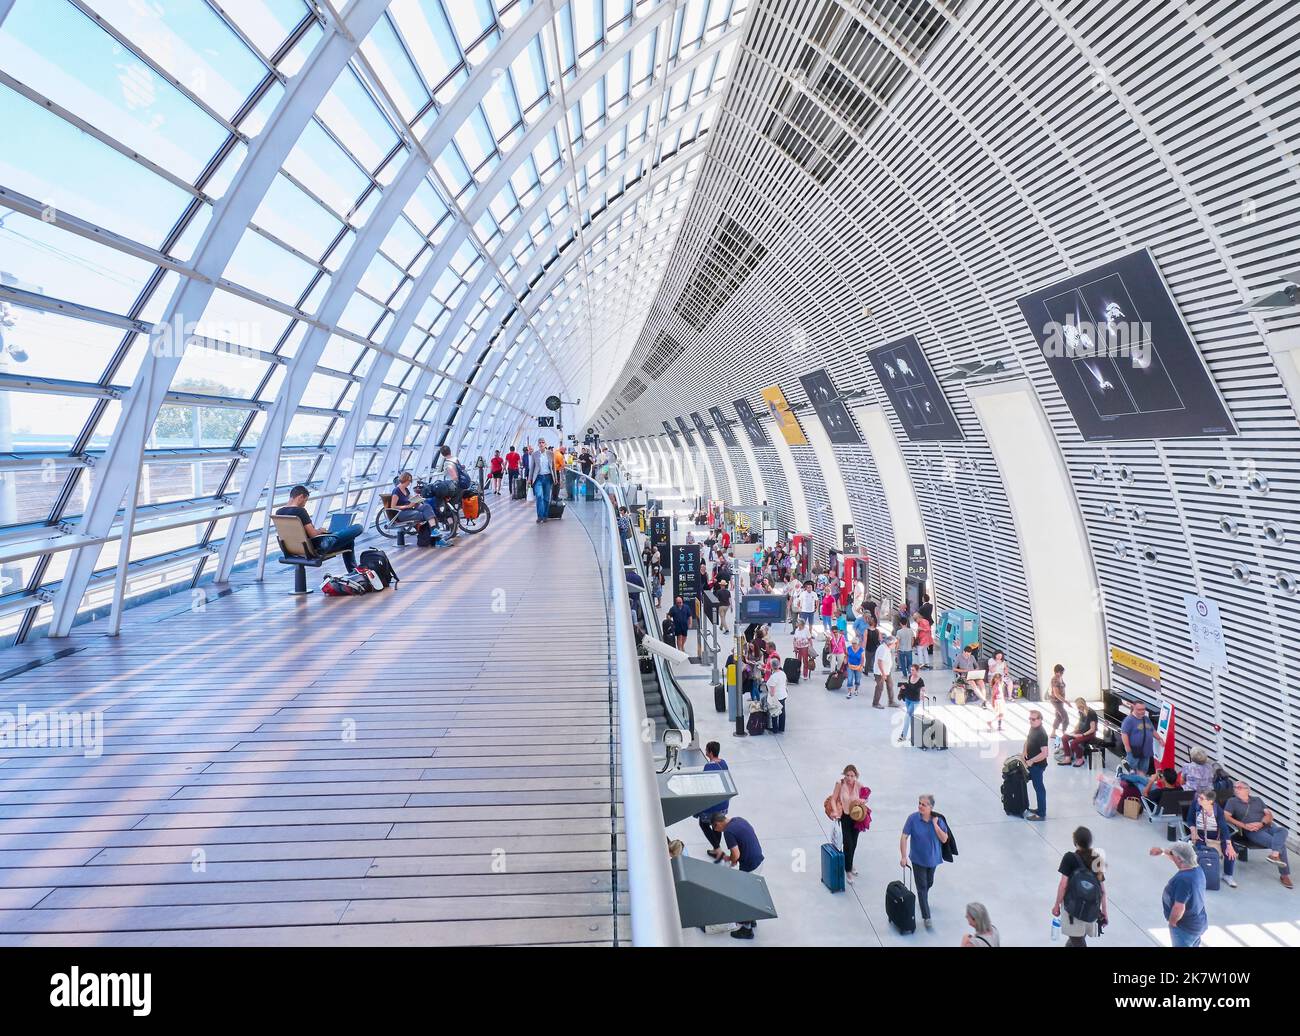 Avignon (south eastern France): passengers waiting in the concourse of the station Stock Photo